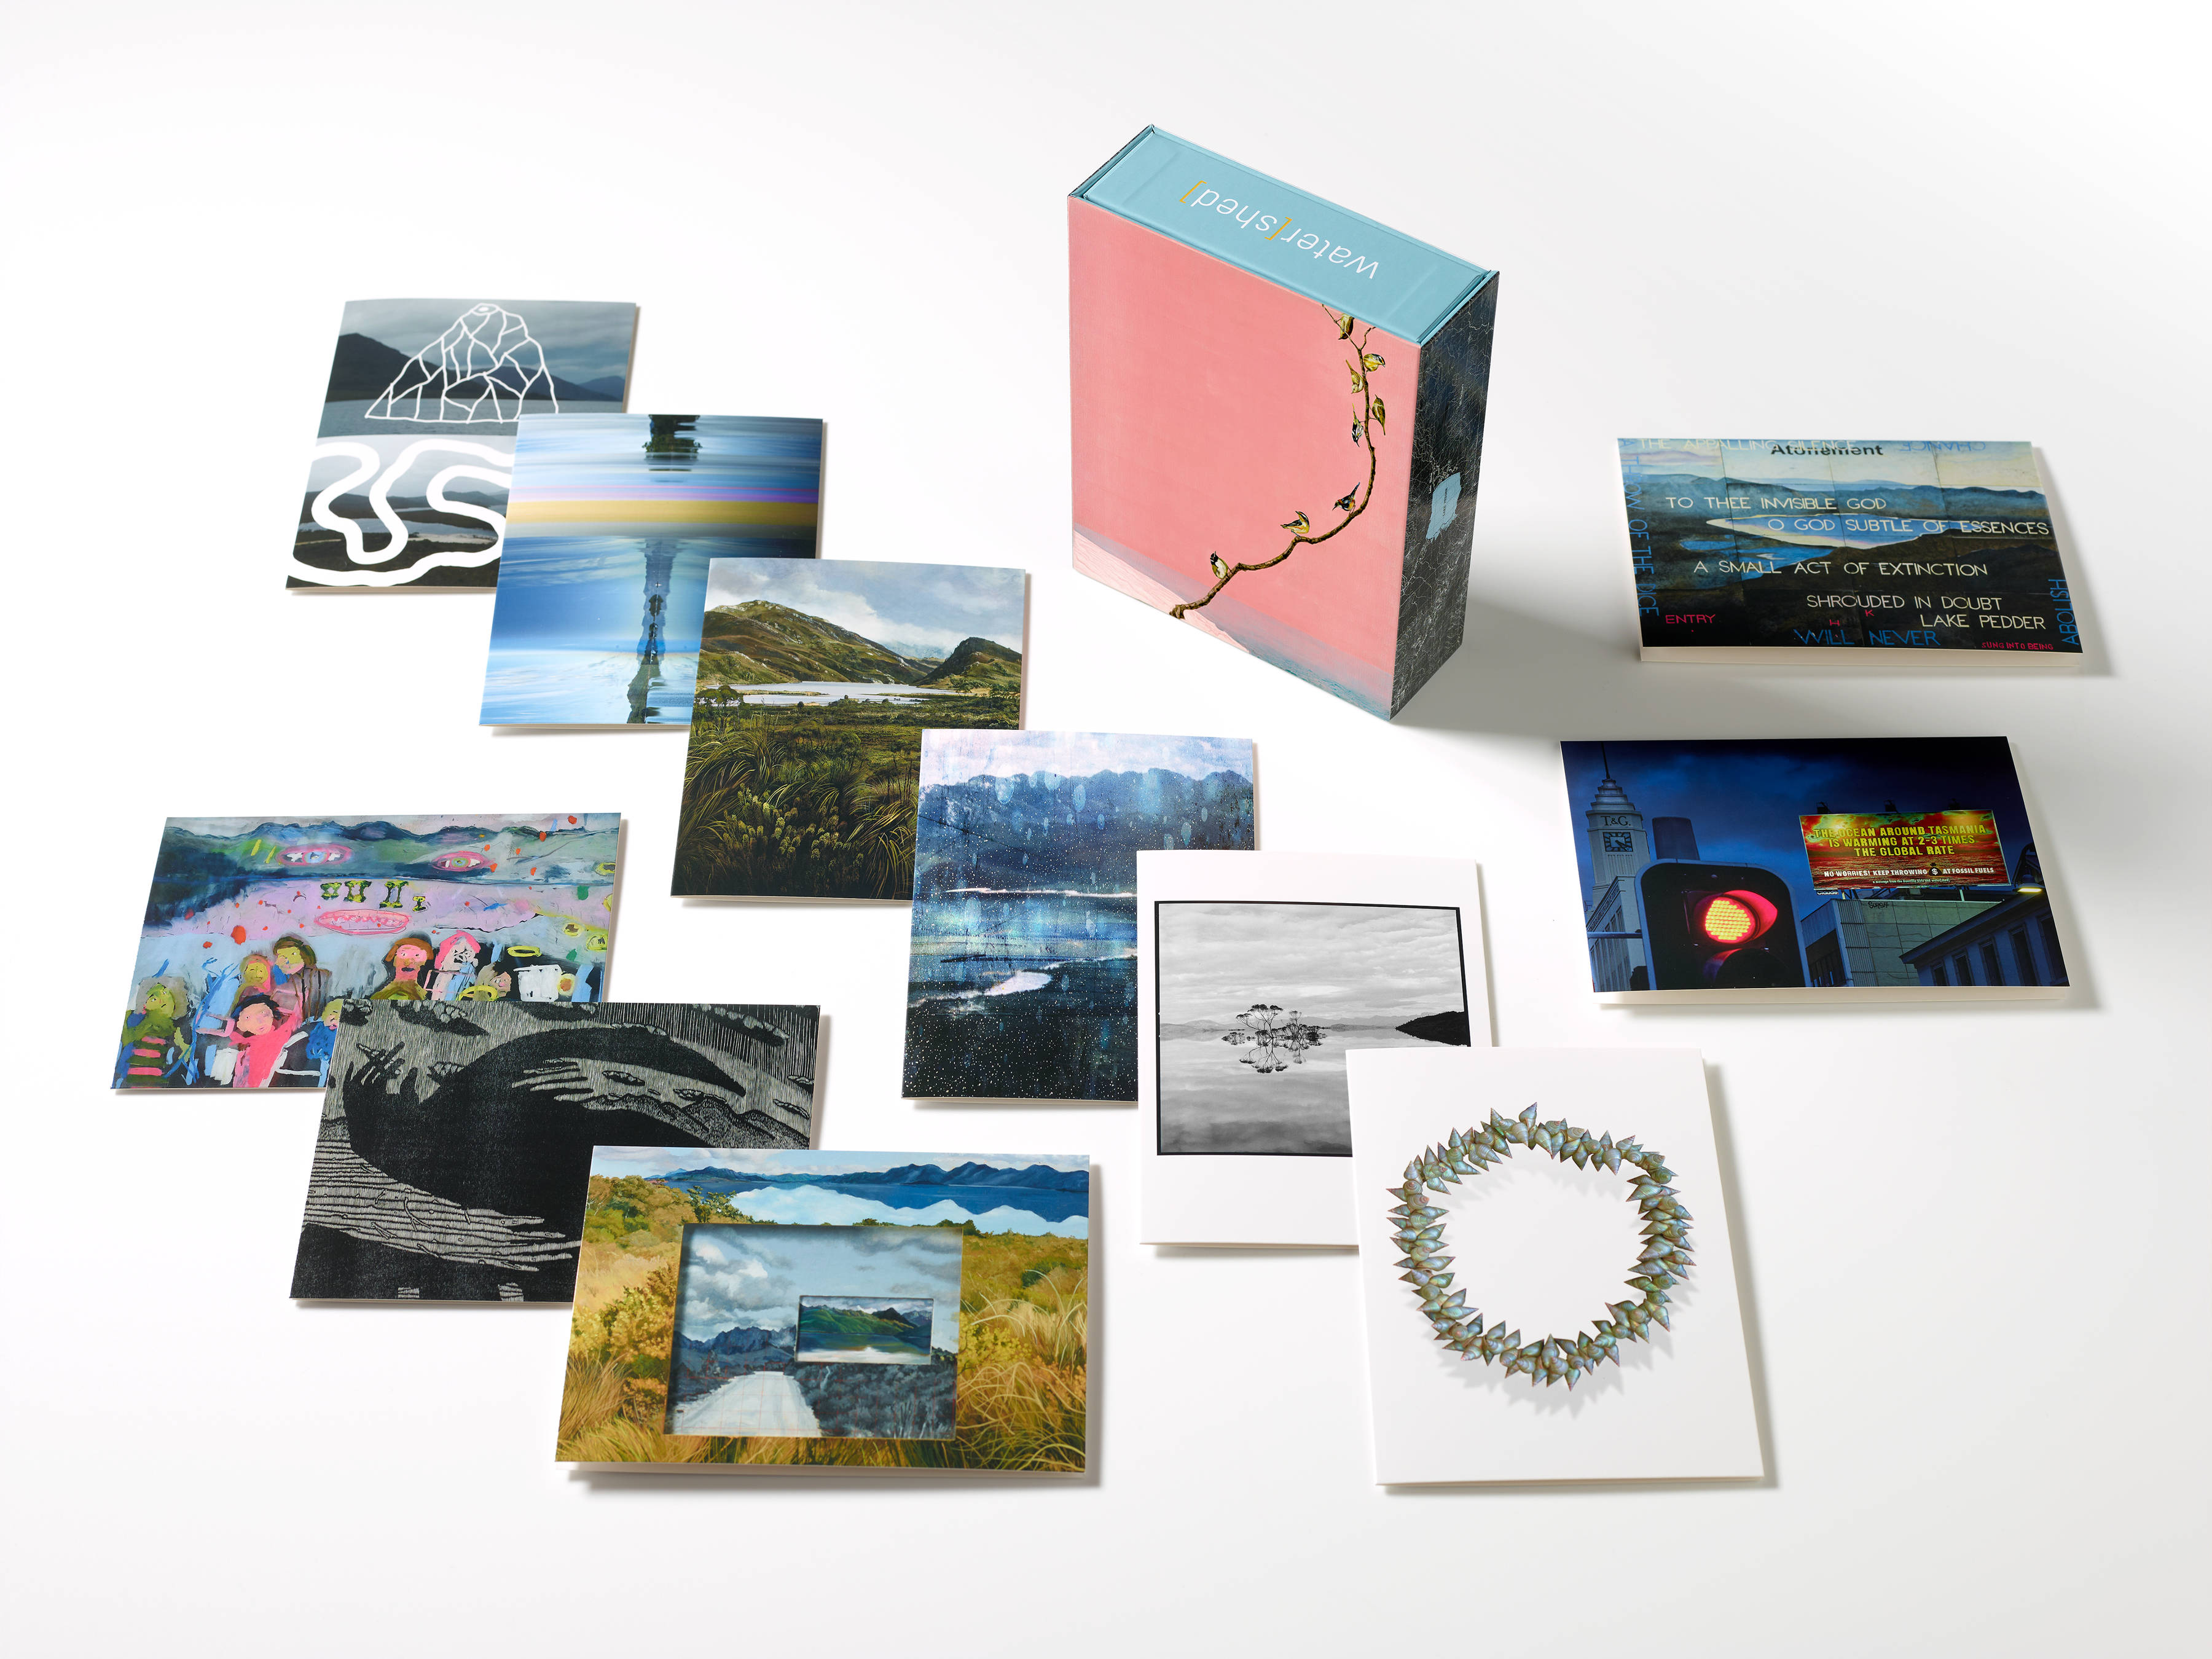 Photograph shows the 12 images of artwork featured in the box set of cards. The cards are laid flat slightly overlapping with the box standing vertical towards the top pf the image. Photo: Peter Whyte.